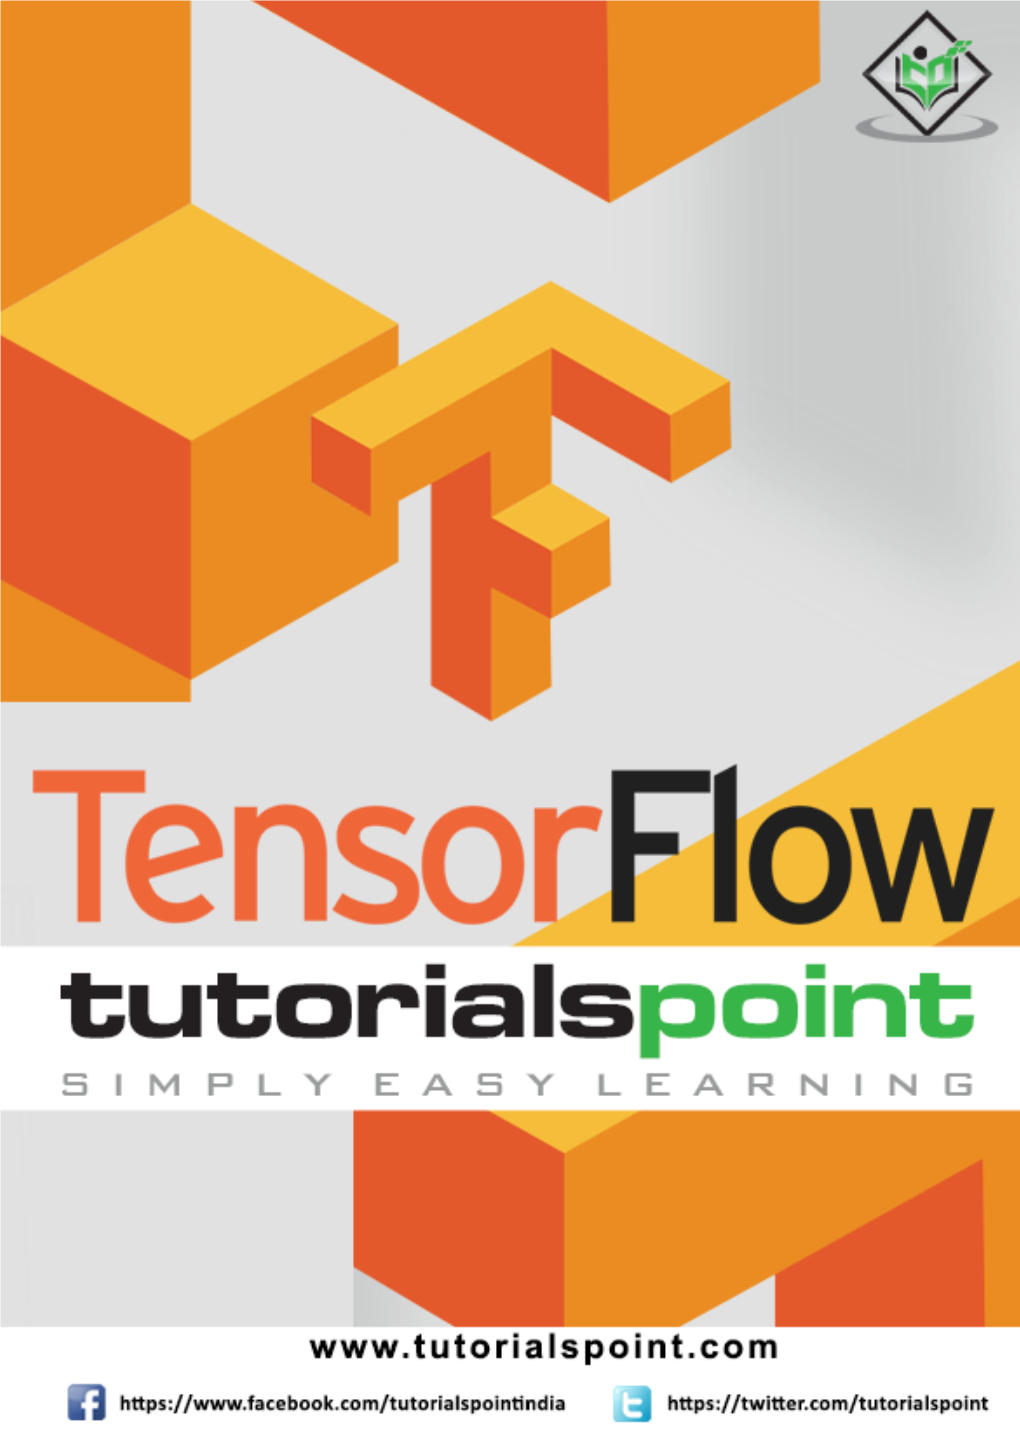 Tensorflow Is an Open Source Machine Learning Framework for All Developers